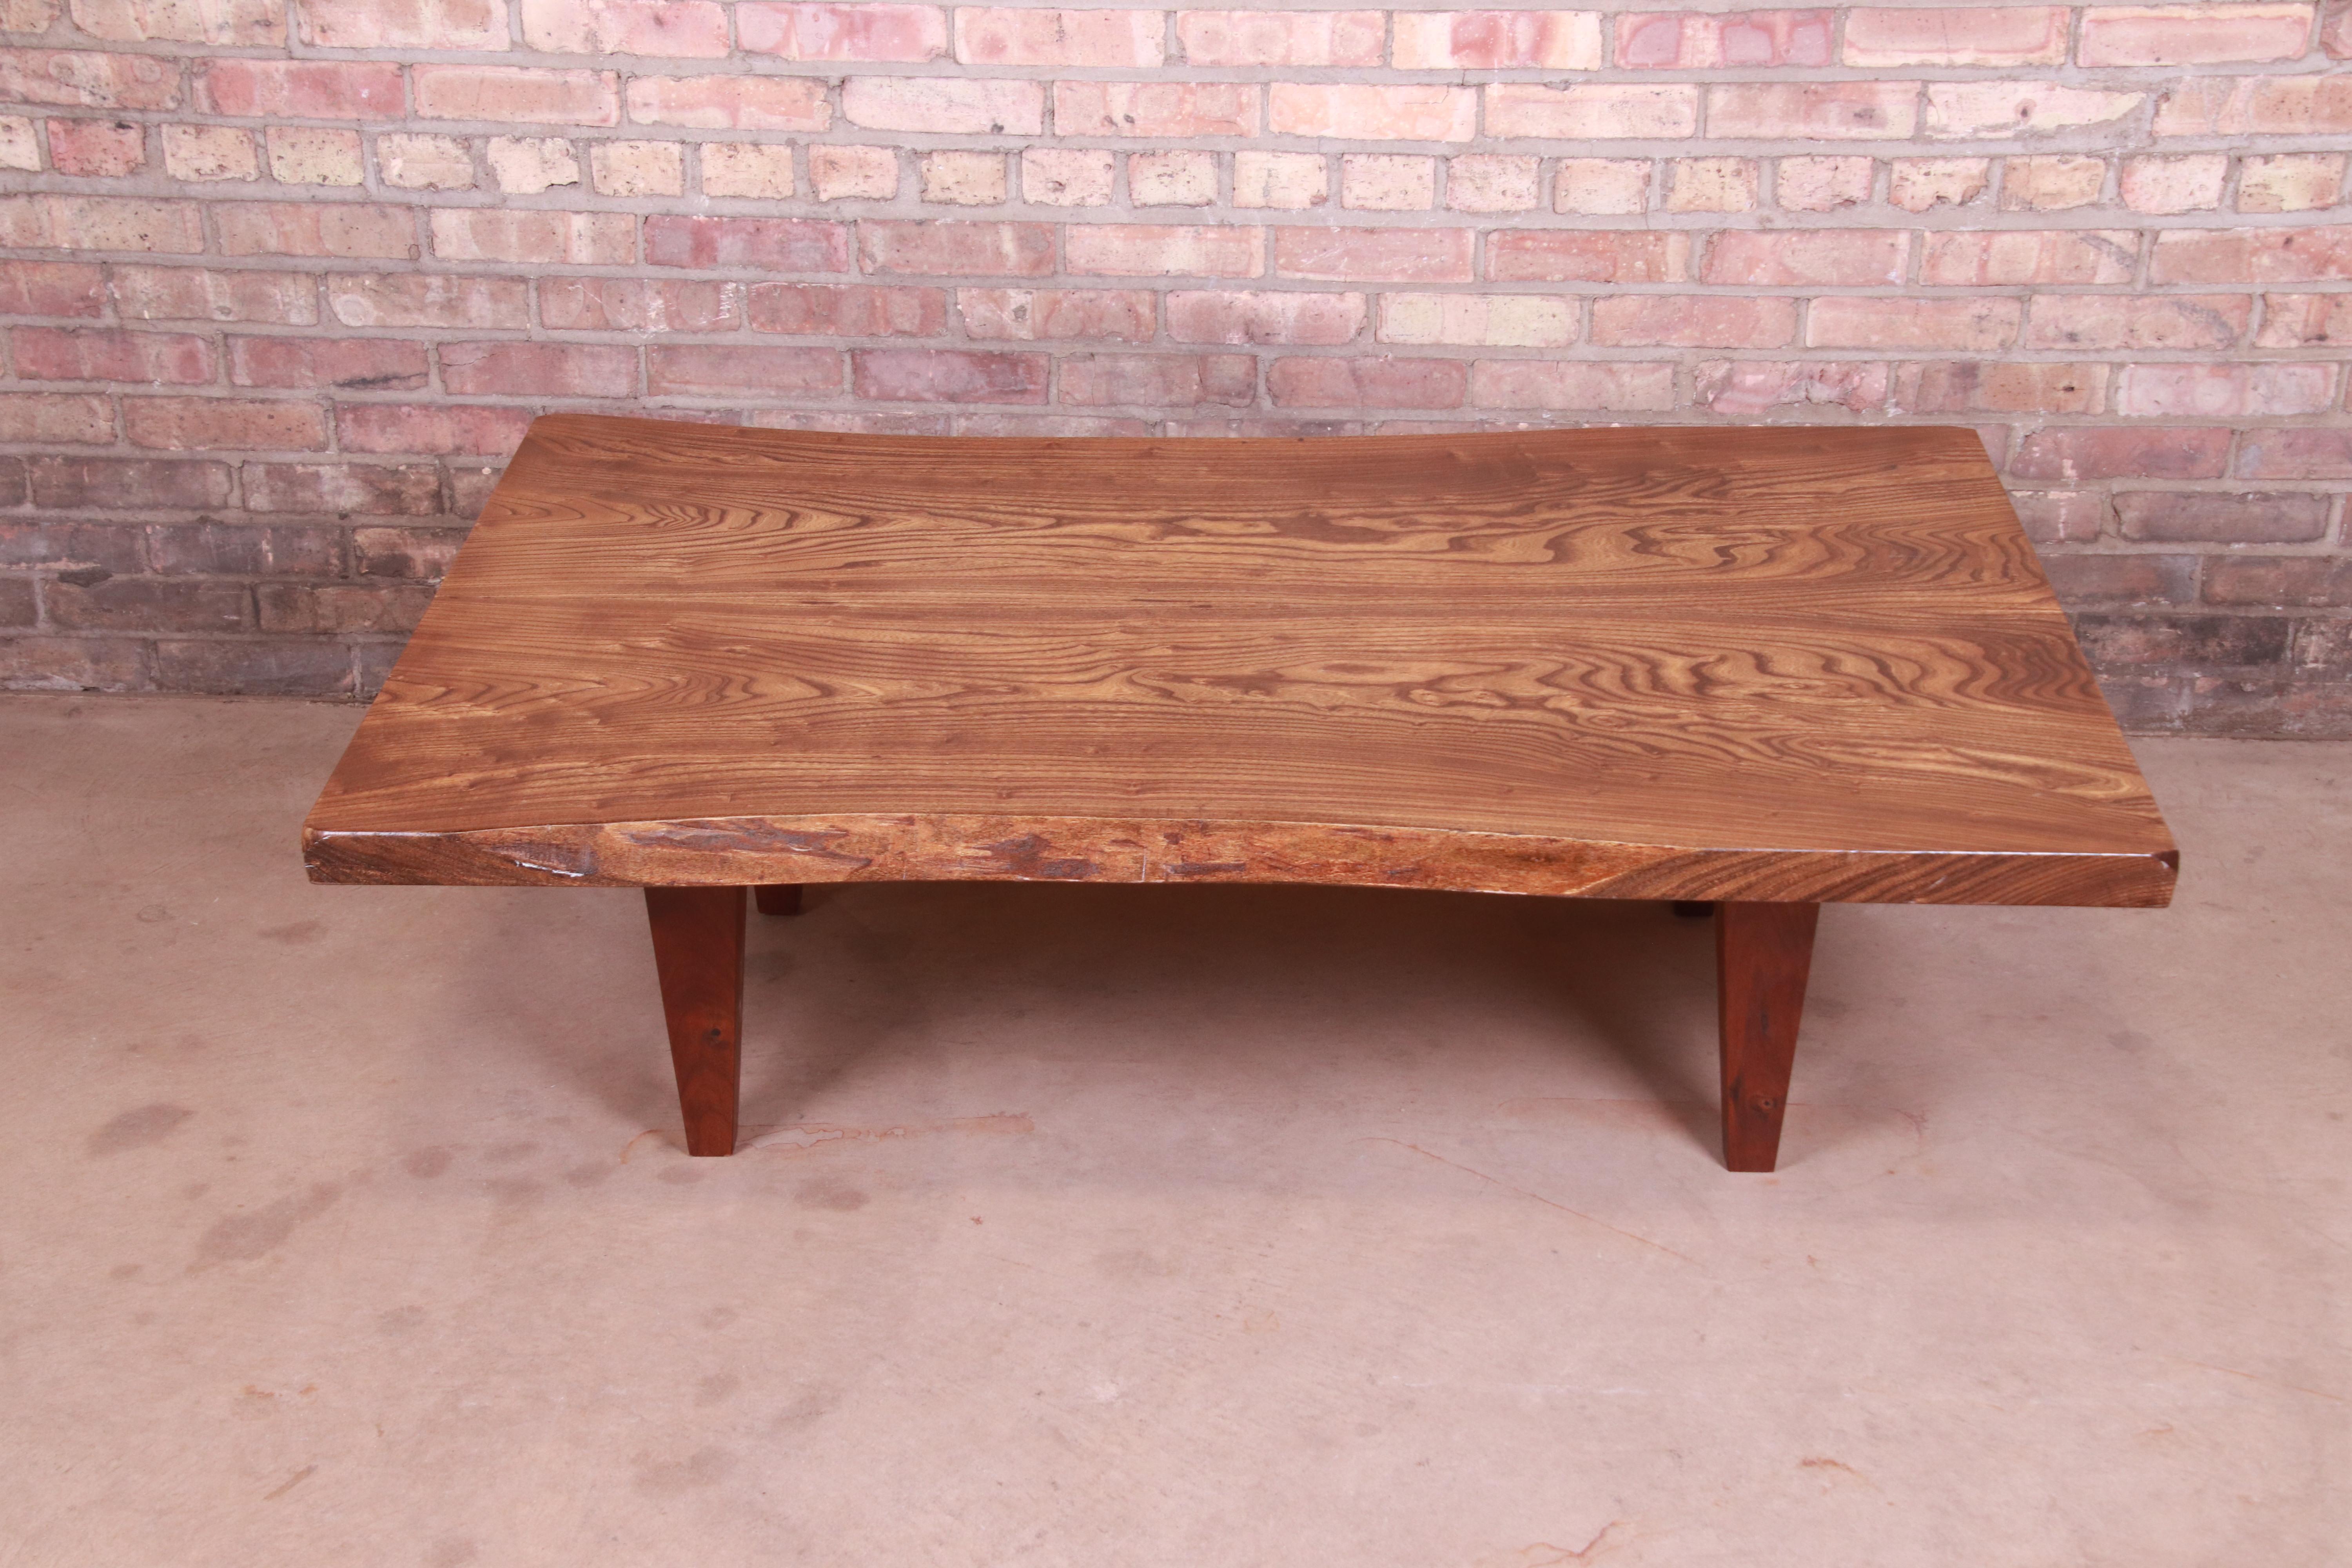 An exceptional studio crafted organic modern coffee or cocktail table

In the manner of George Nakashima

By Terrence Karpowicz (signed and dated by artist)

USA, 2008

Solid walnut free form live edge table top, with tapered solid walnut